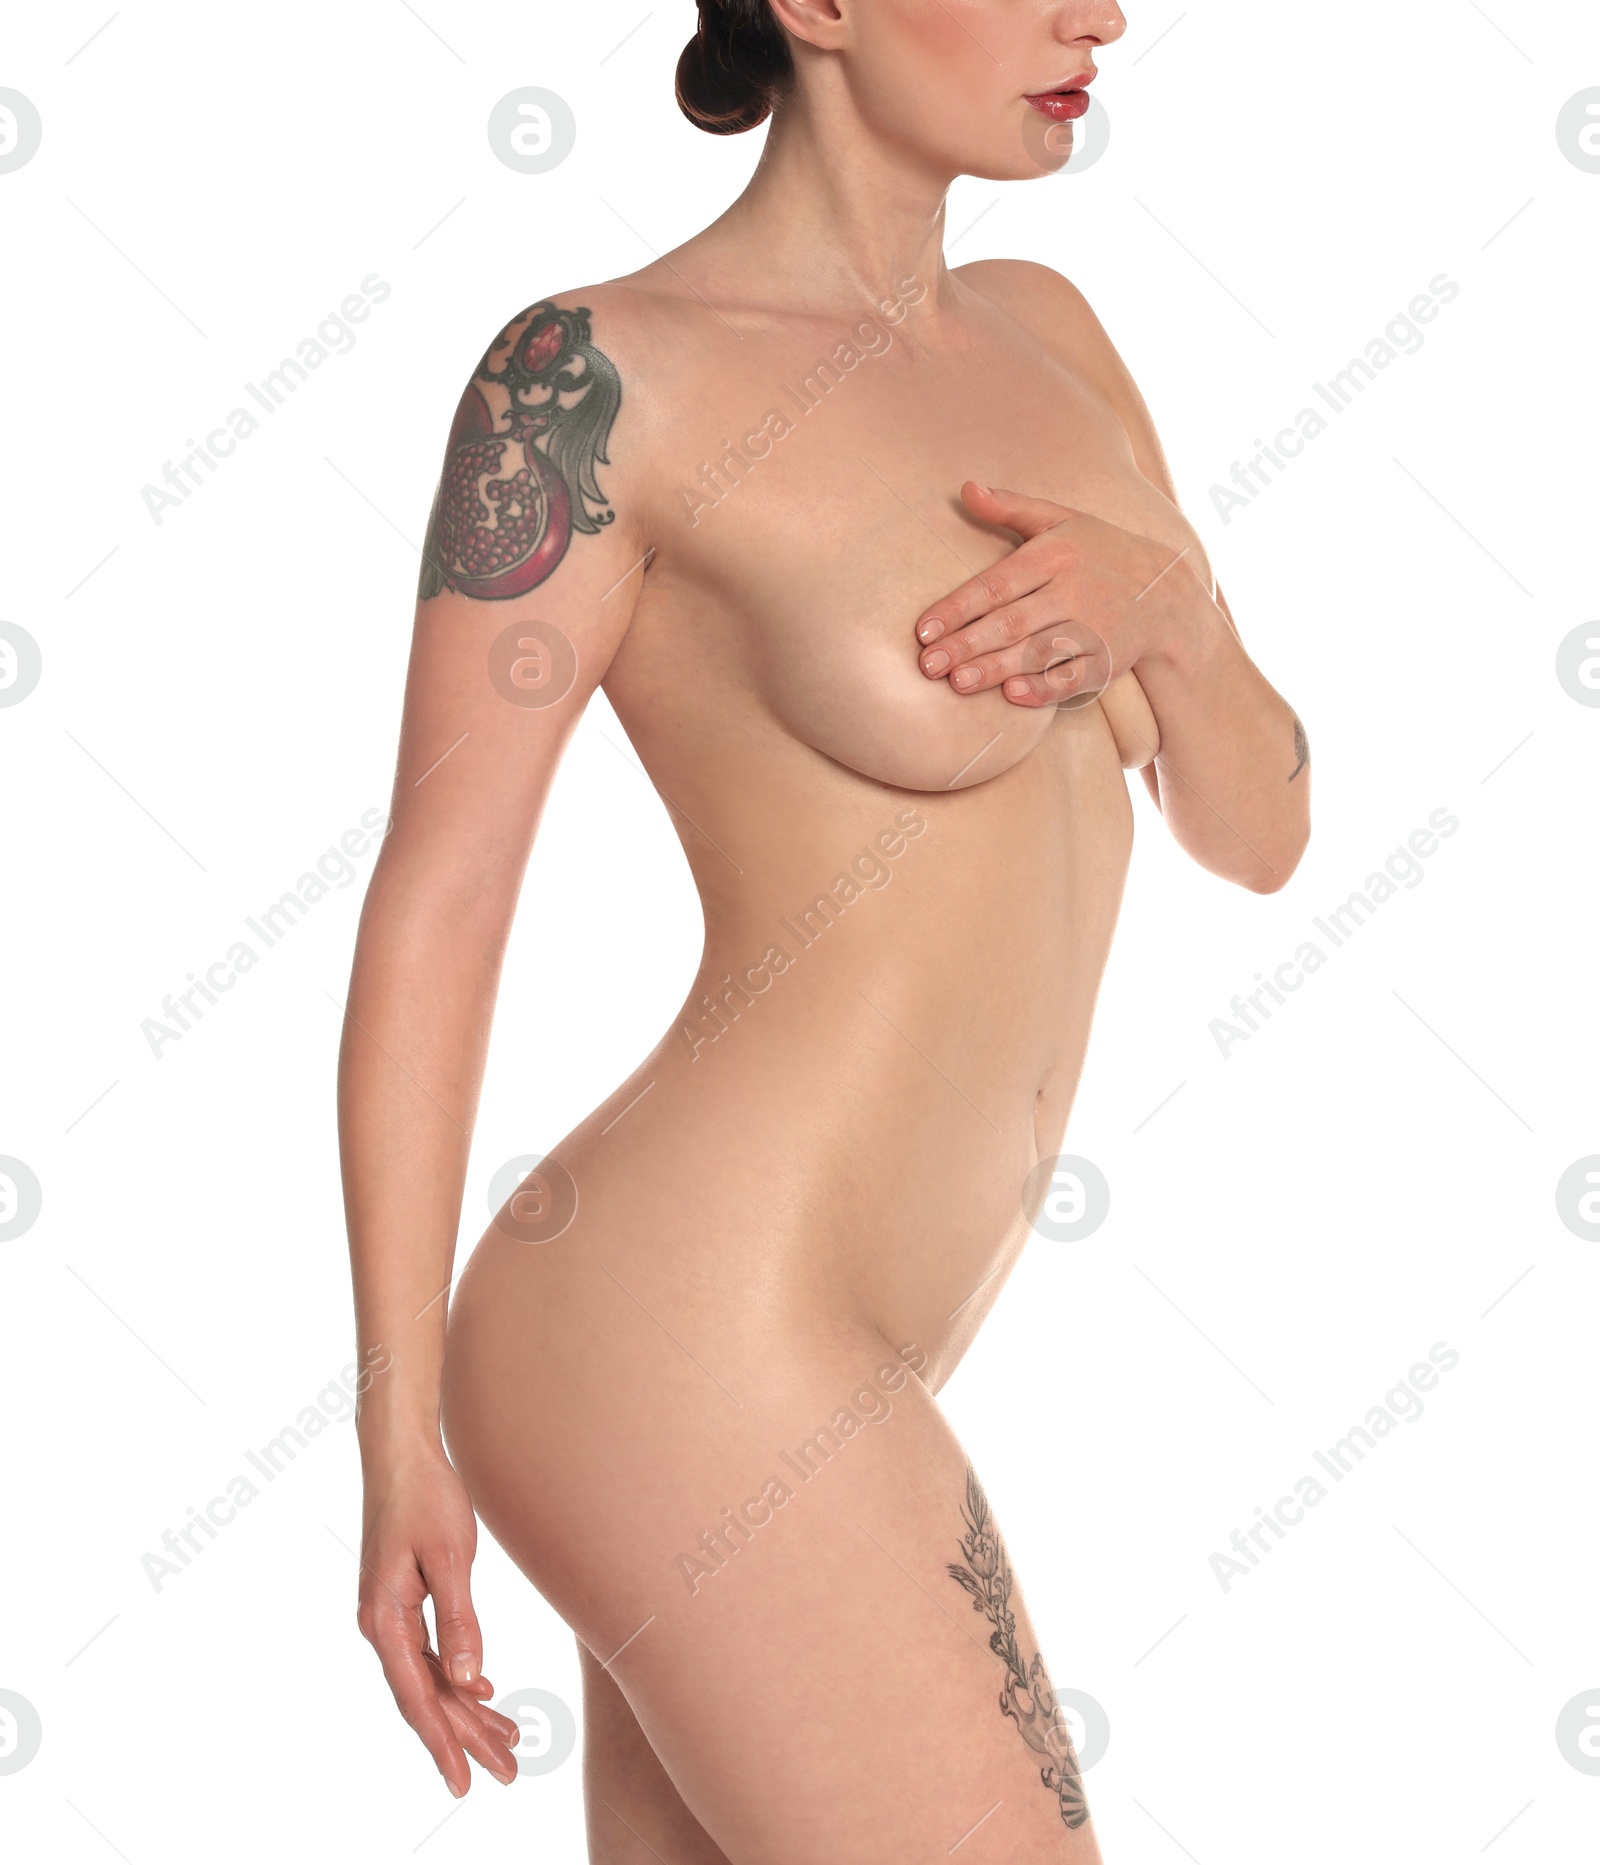 Photo of Nude woman with tattoos posing on white background, closeup